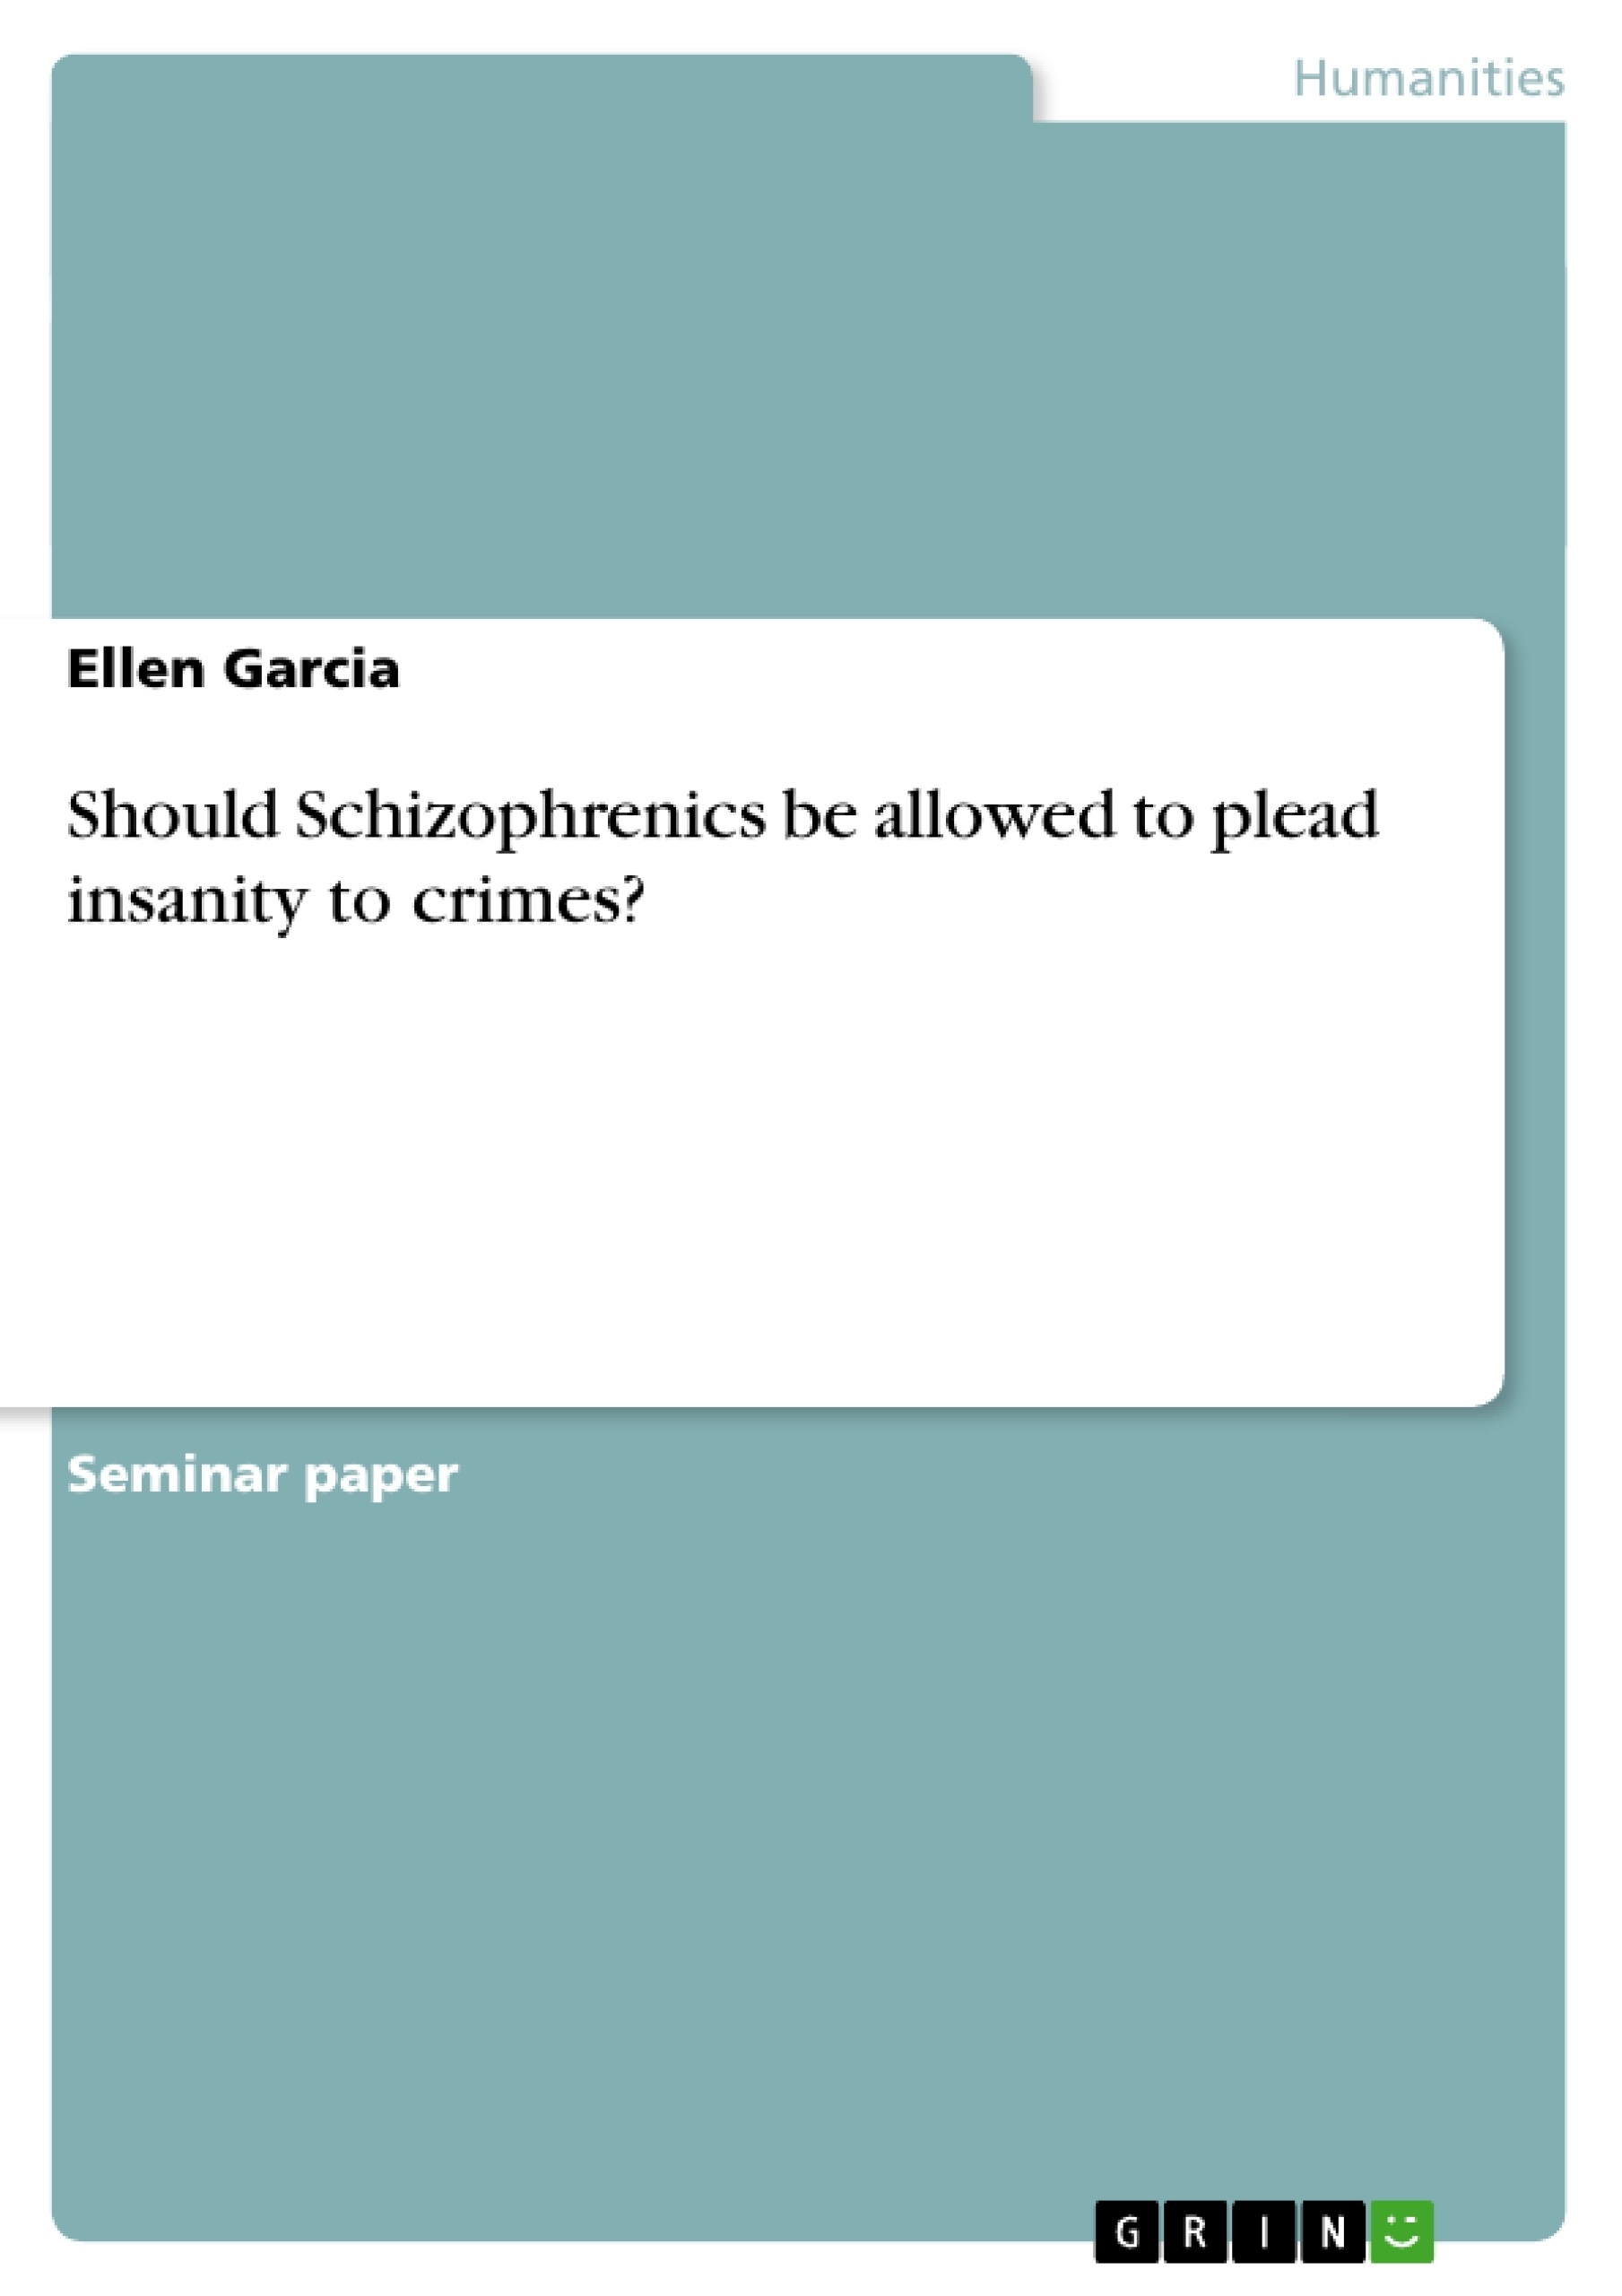 Titre: Should Schizophrenics be allowed to plead insanity to crimes?